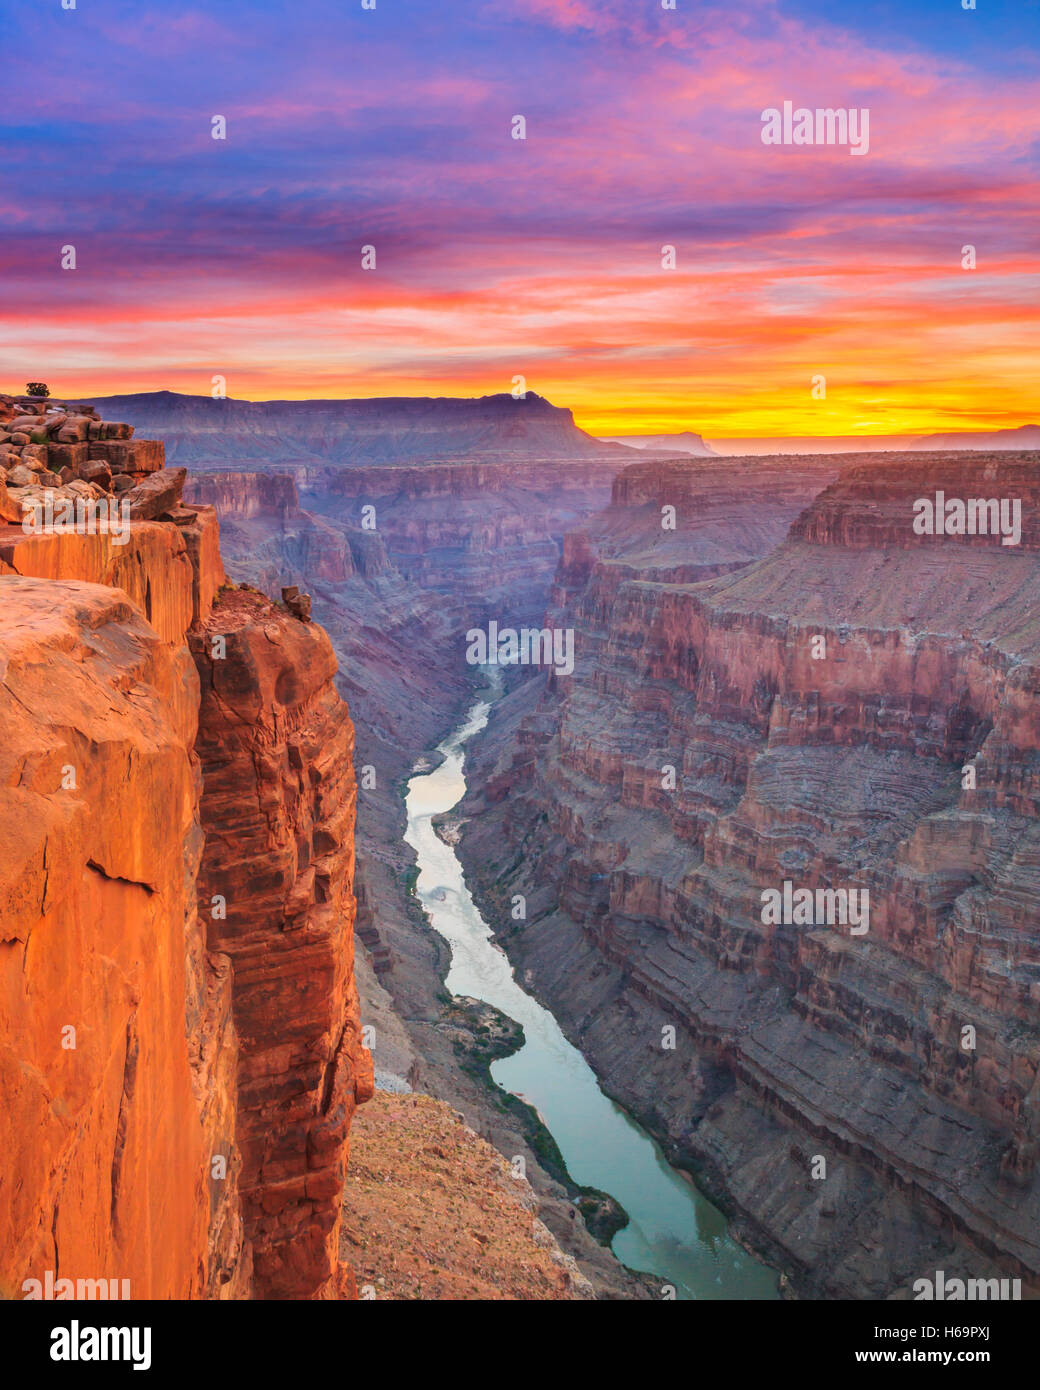 sunrise over the colorado river at toroweap overlook in grand canyon